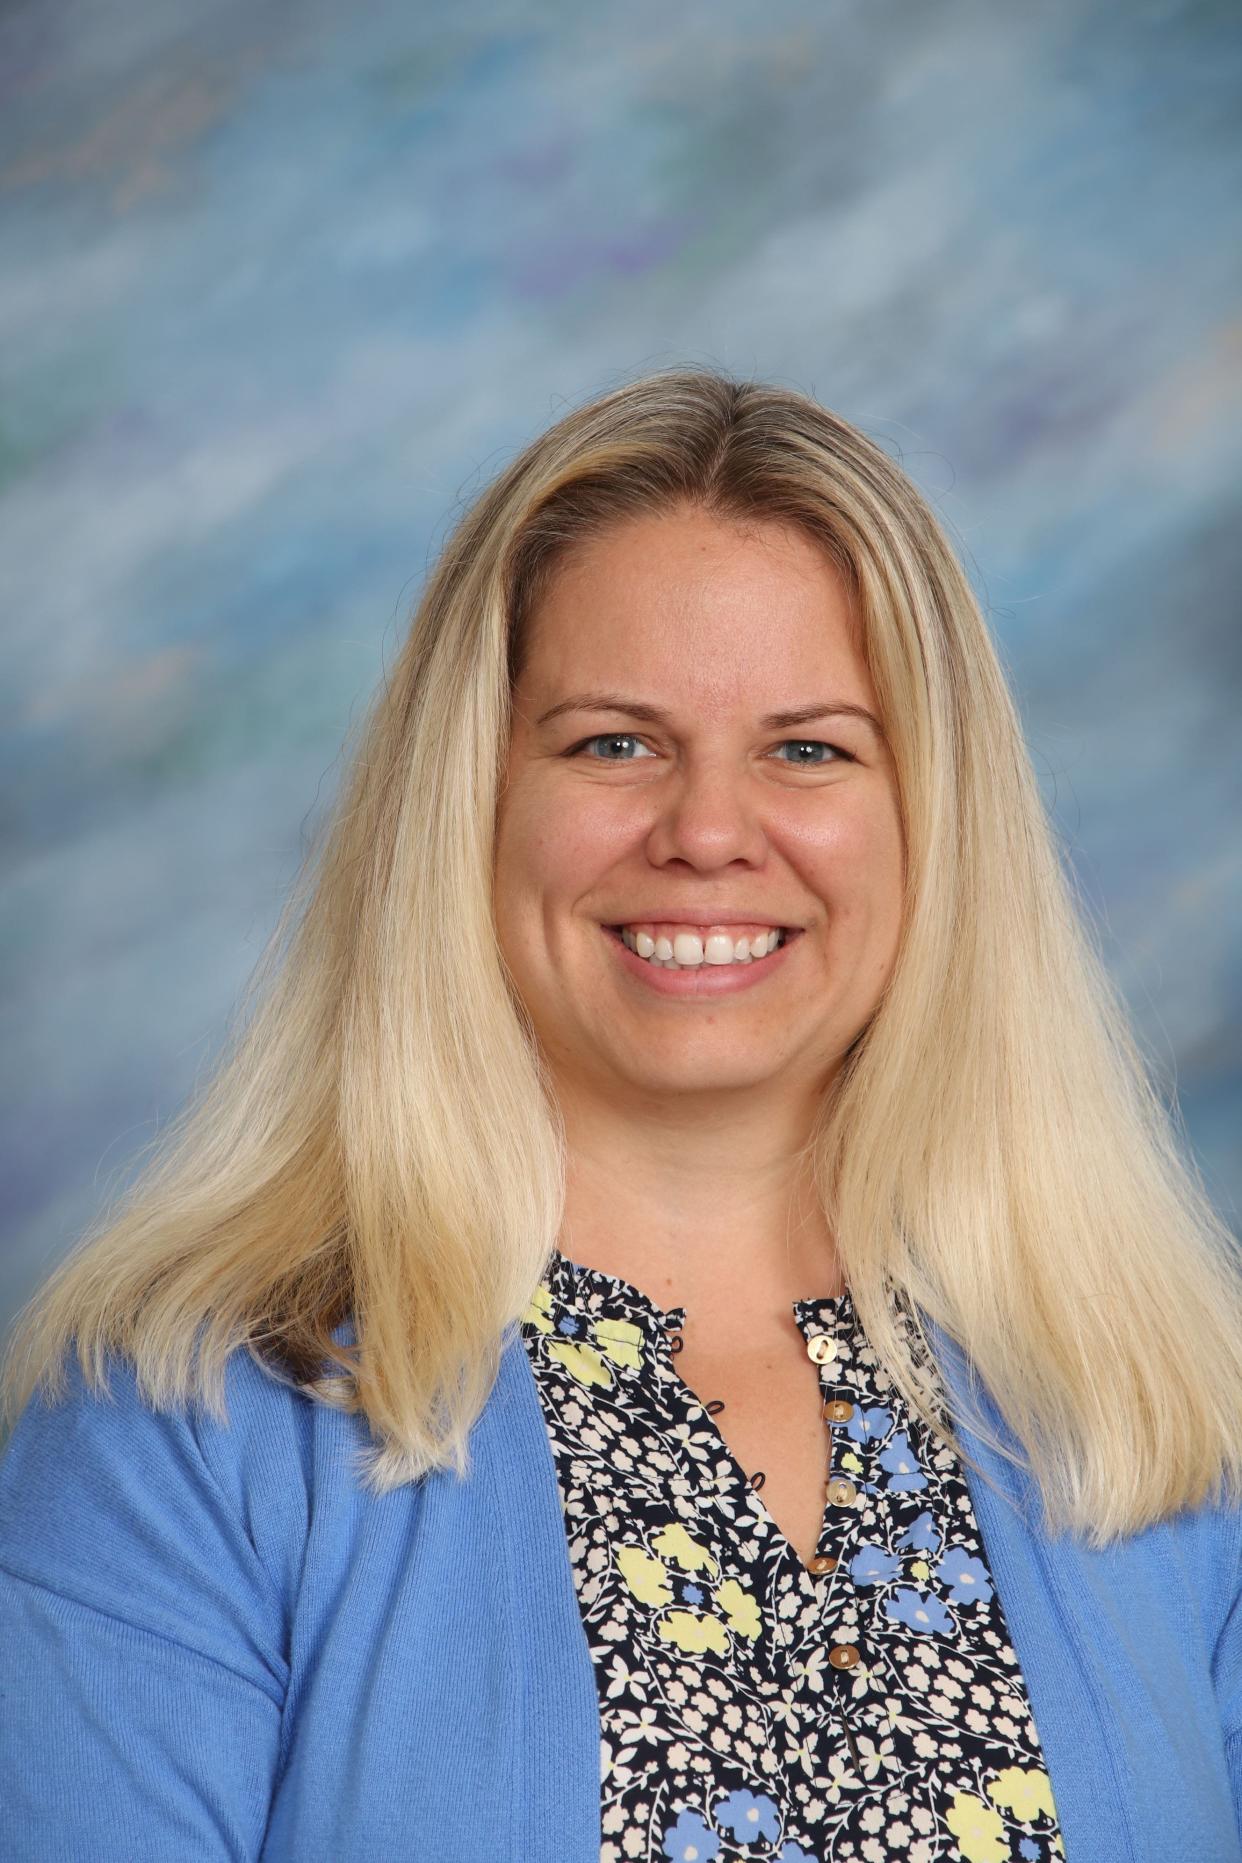 Caley Baker has been selected to become the next principal of Hanby Elementary, pending July 8 board of education approval.